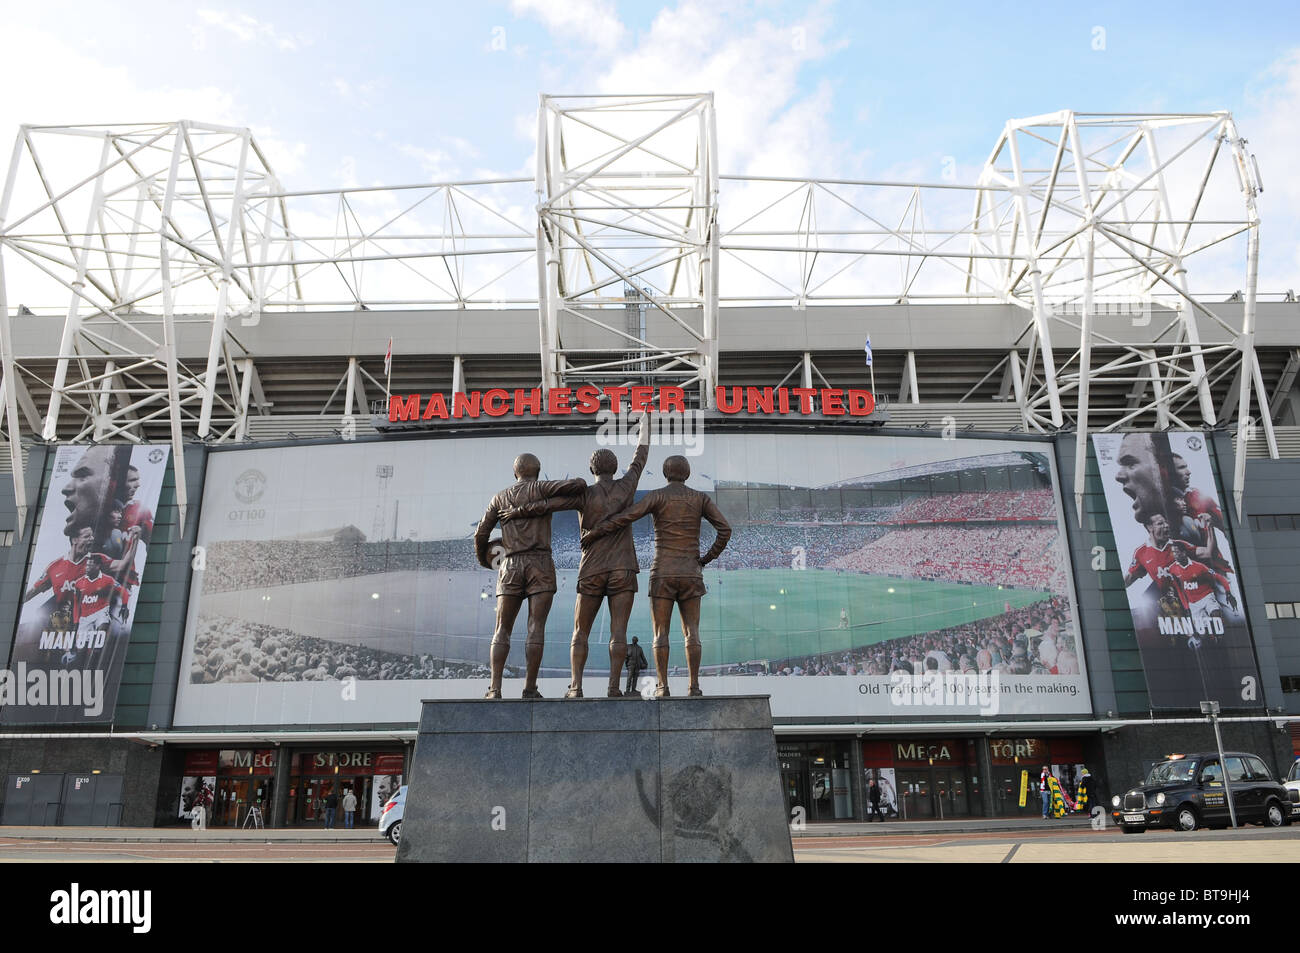 Old Trafford home to Manchester United Football Club Stock Photo